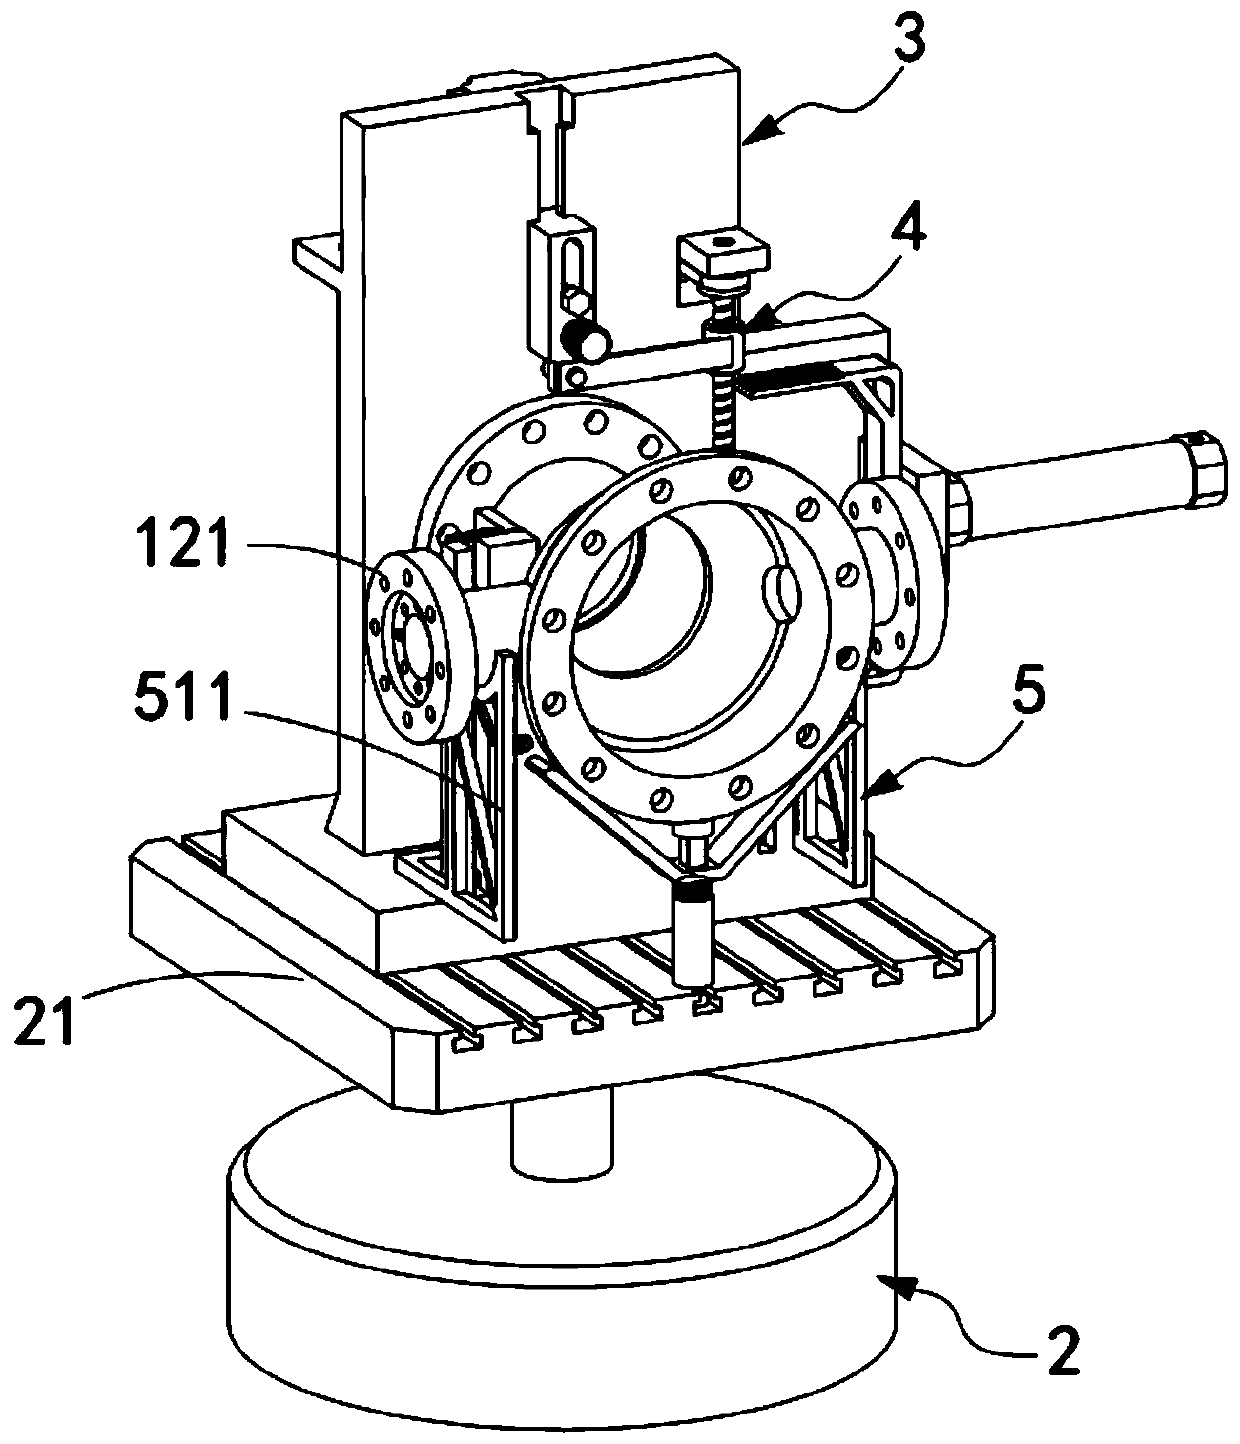 Processed upper tool positioning method special for valve body